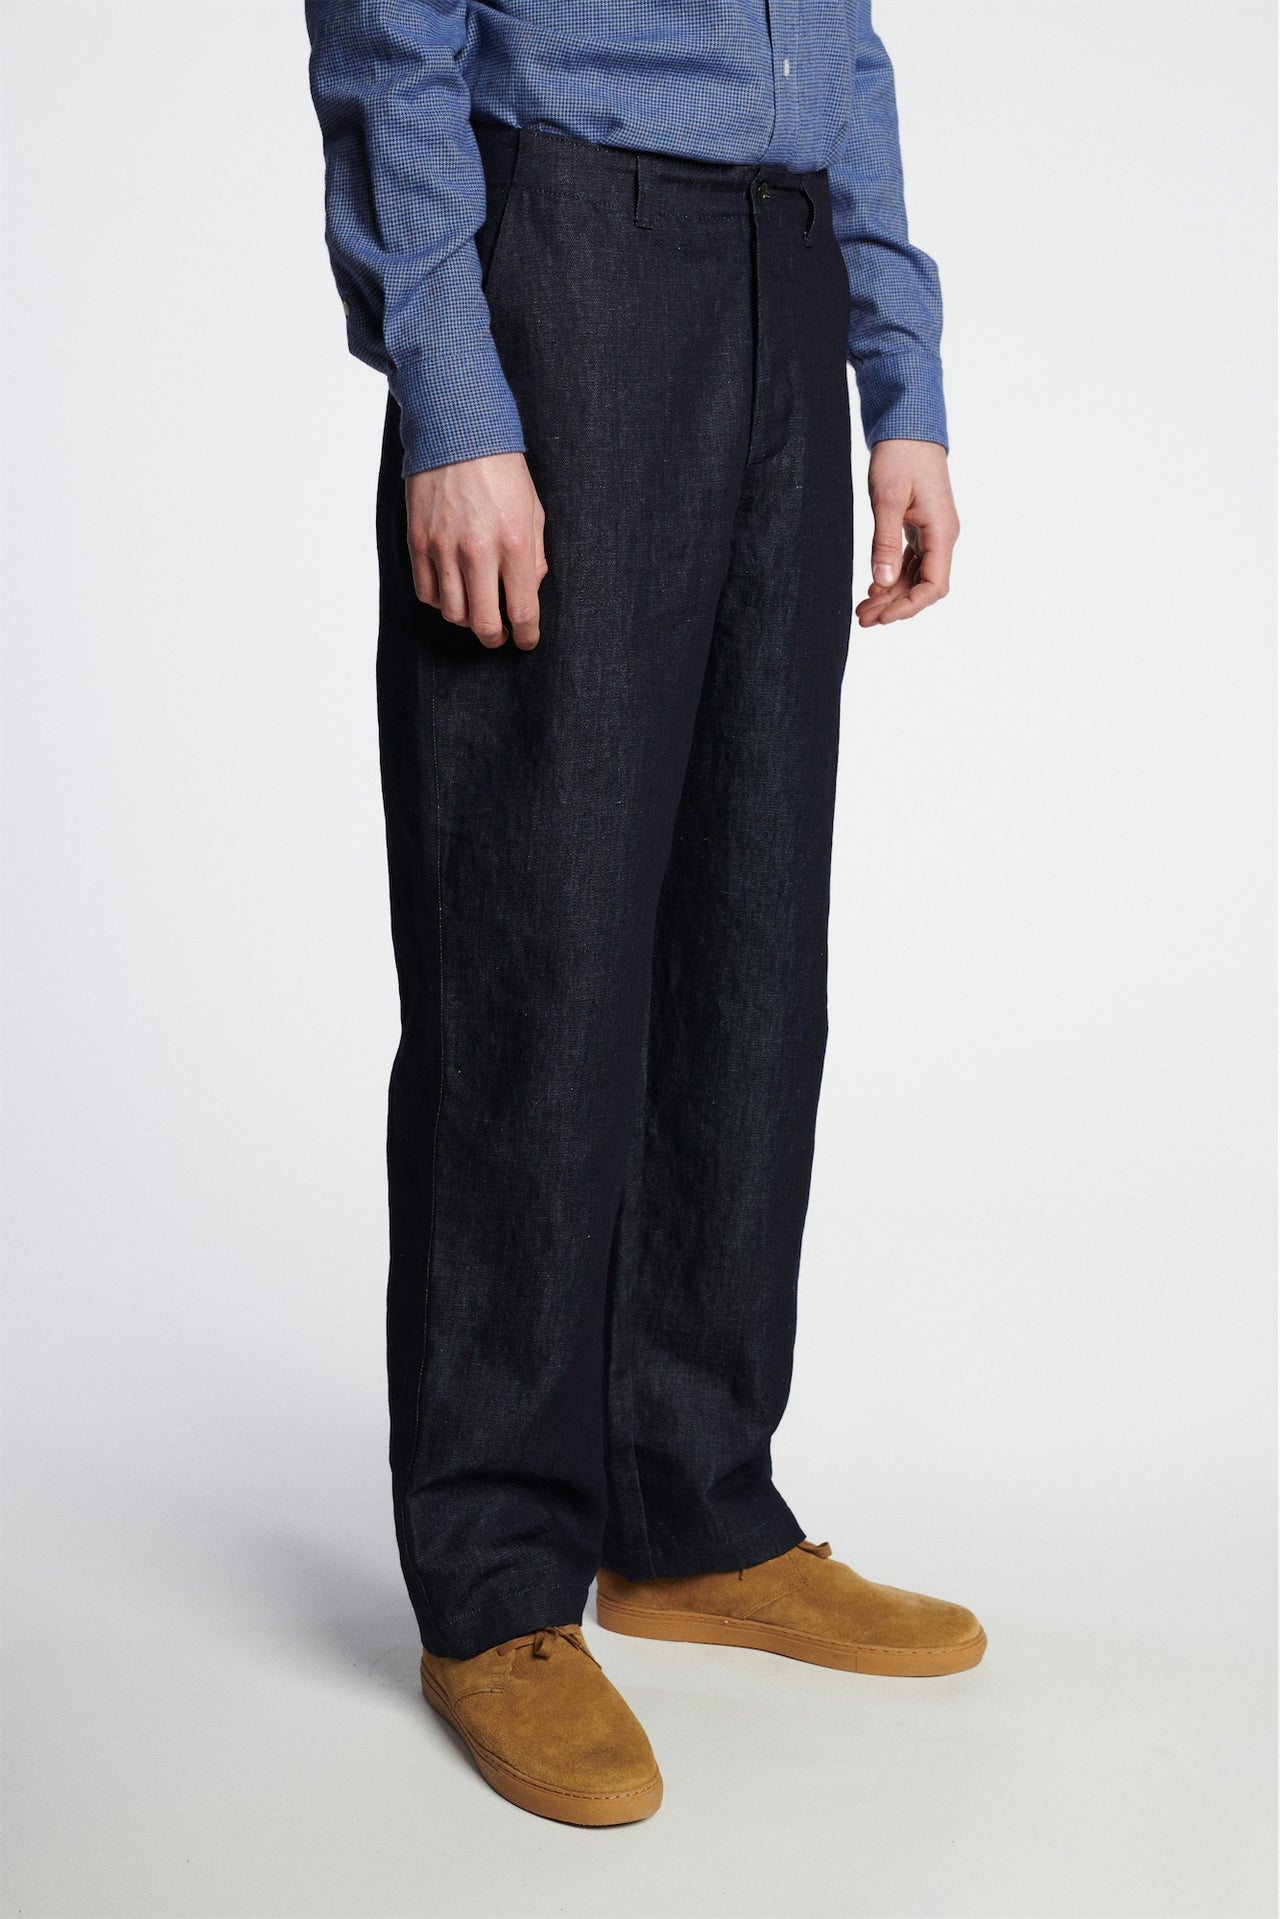 Rolling Hills Trousers in Hemp and Cotton